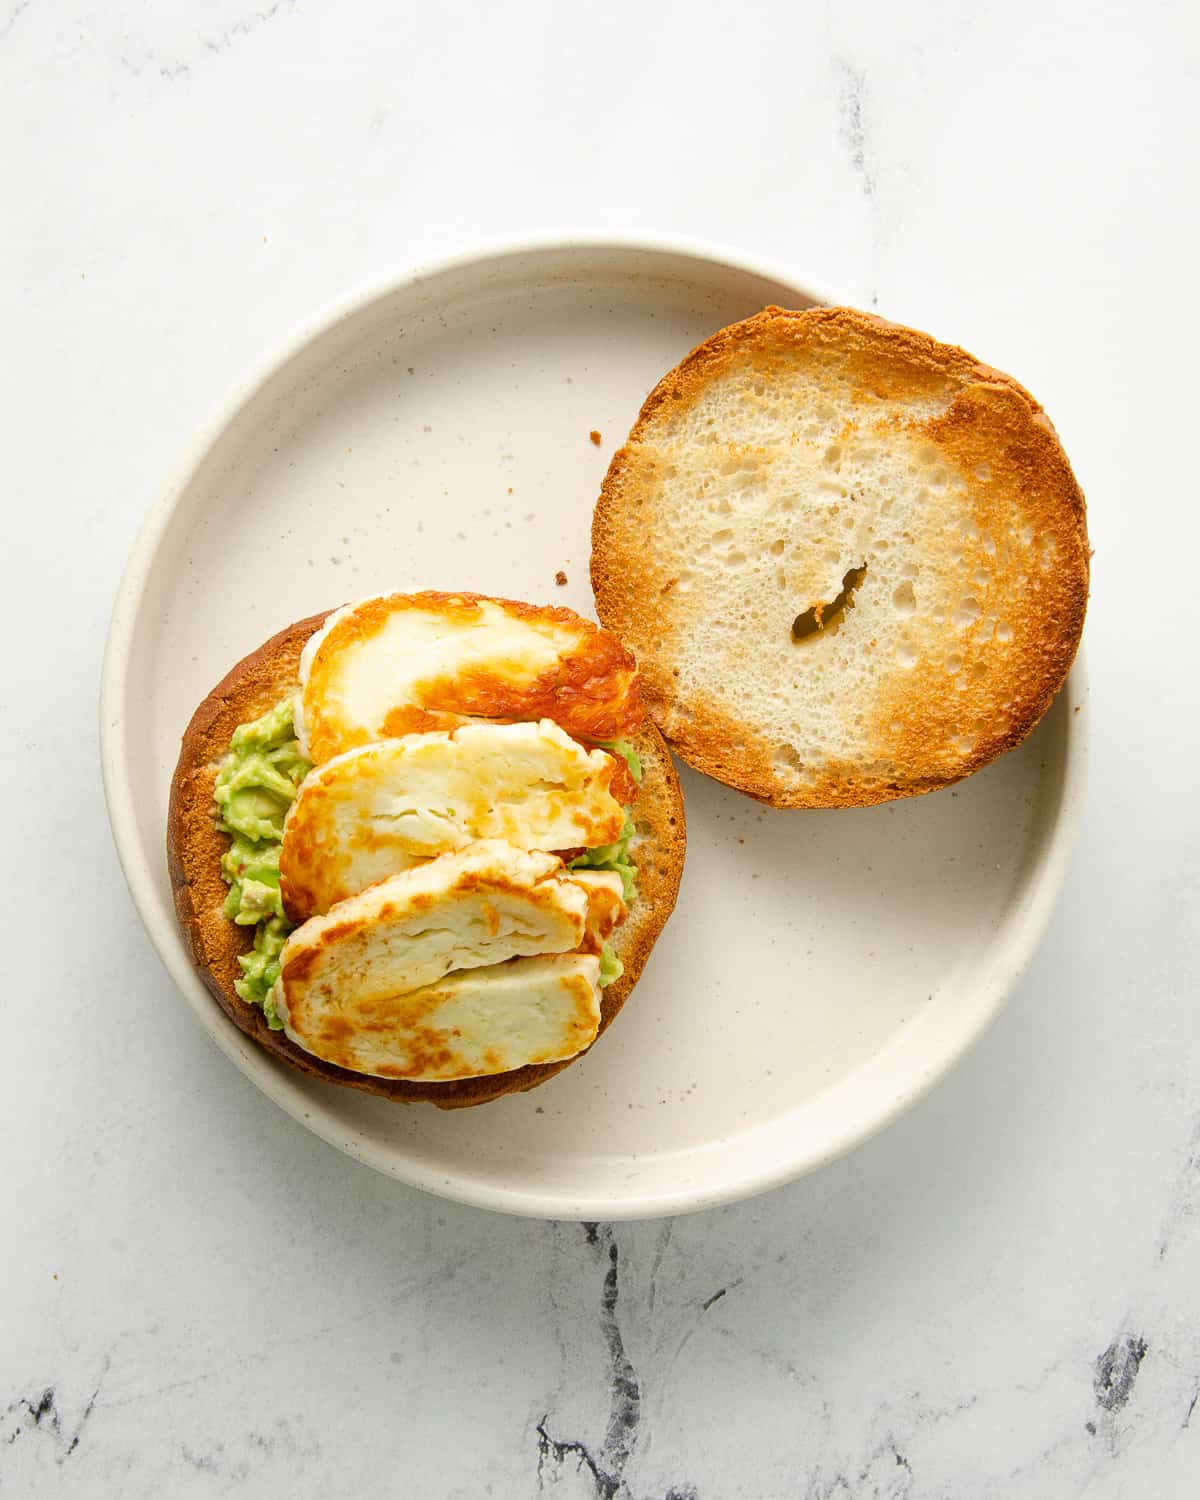 Two halves of a toasted bagel with mashed avocado and halloumi on one side on a white plate.